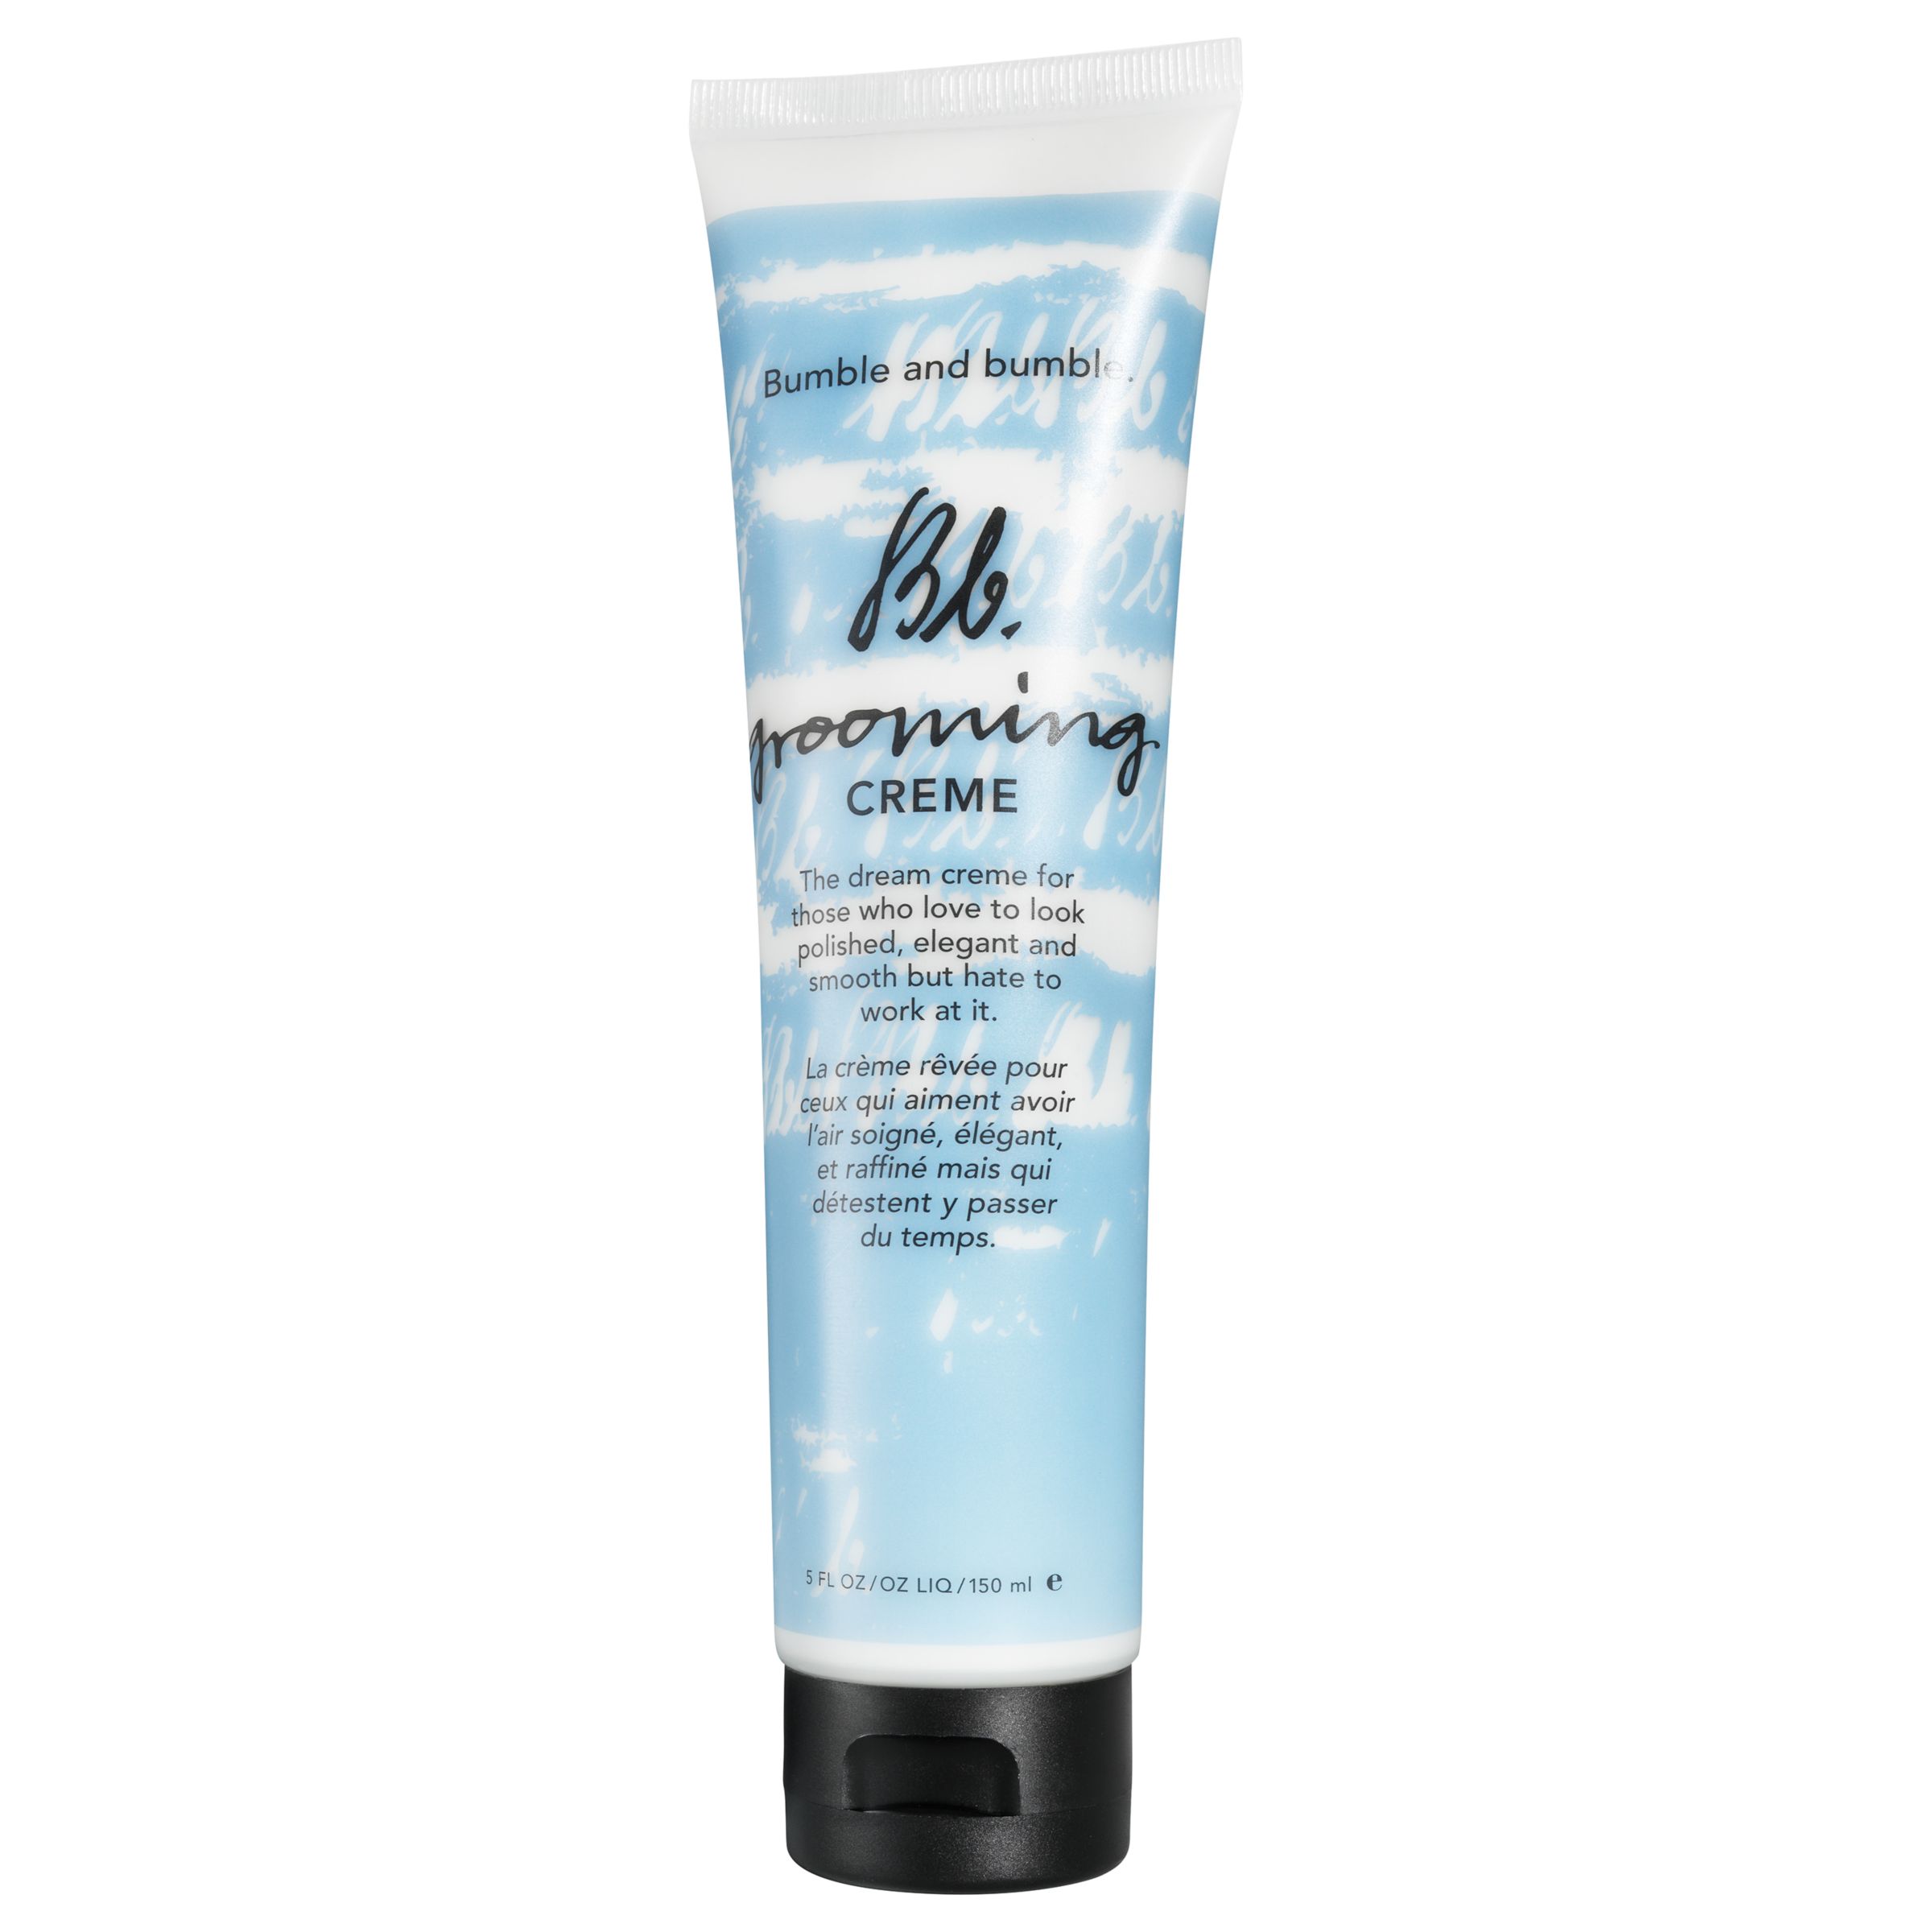 Bumble and bumble Grooming Creme, 150ml 1